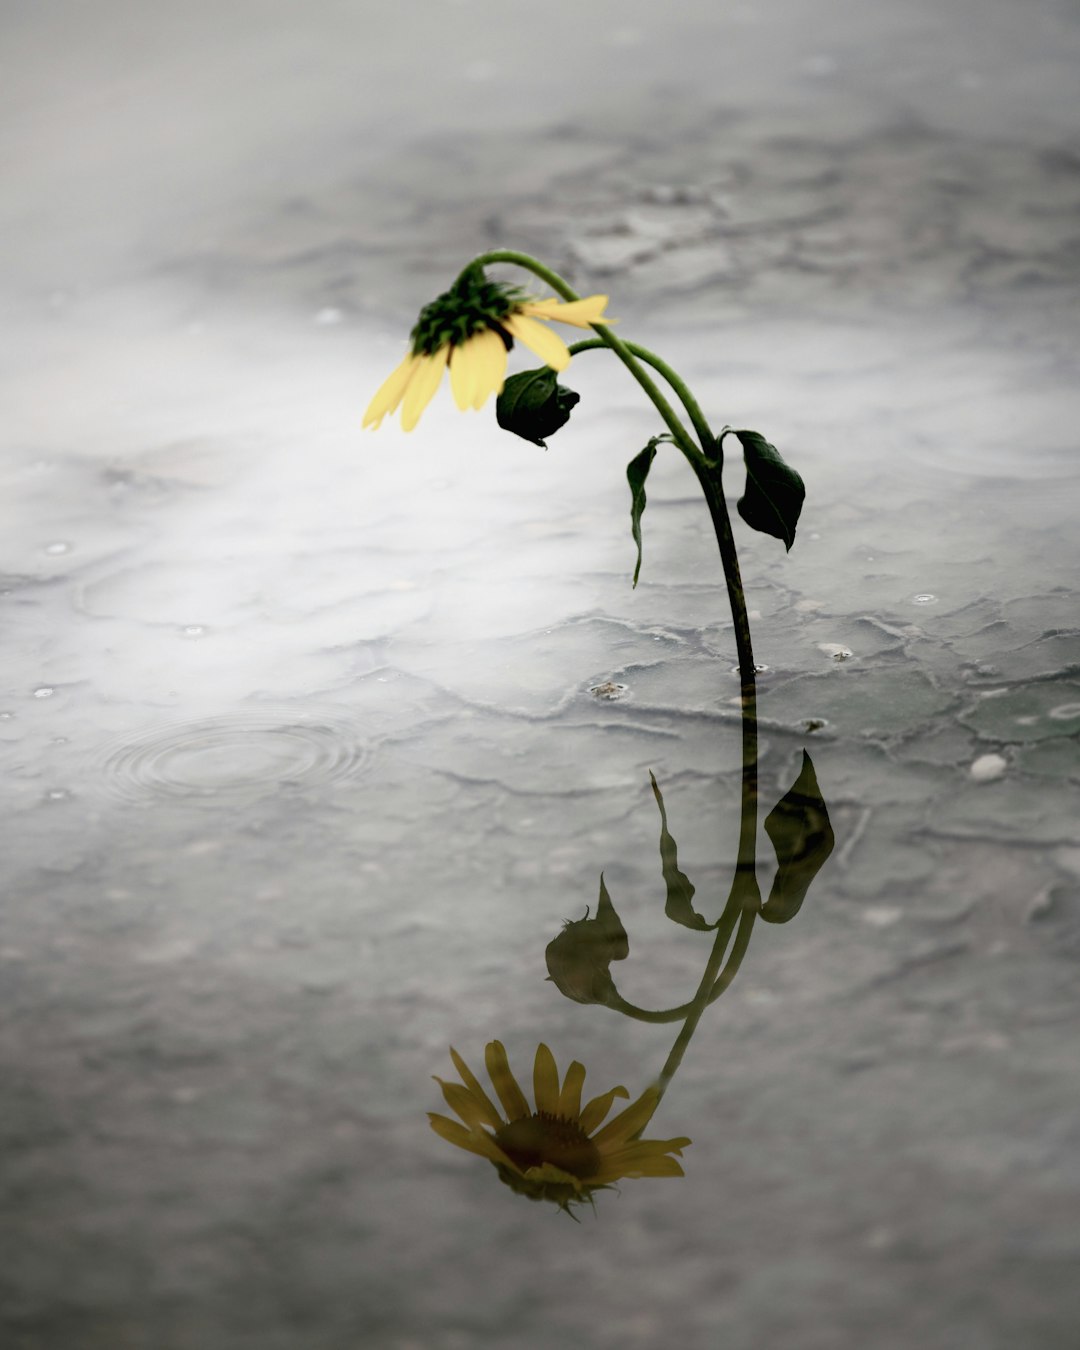 water reflection of sunflower